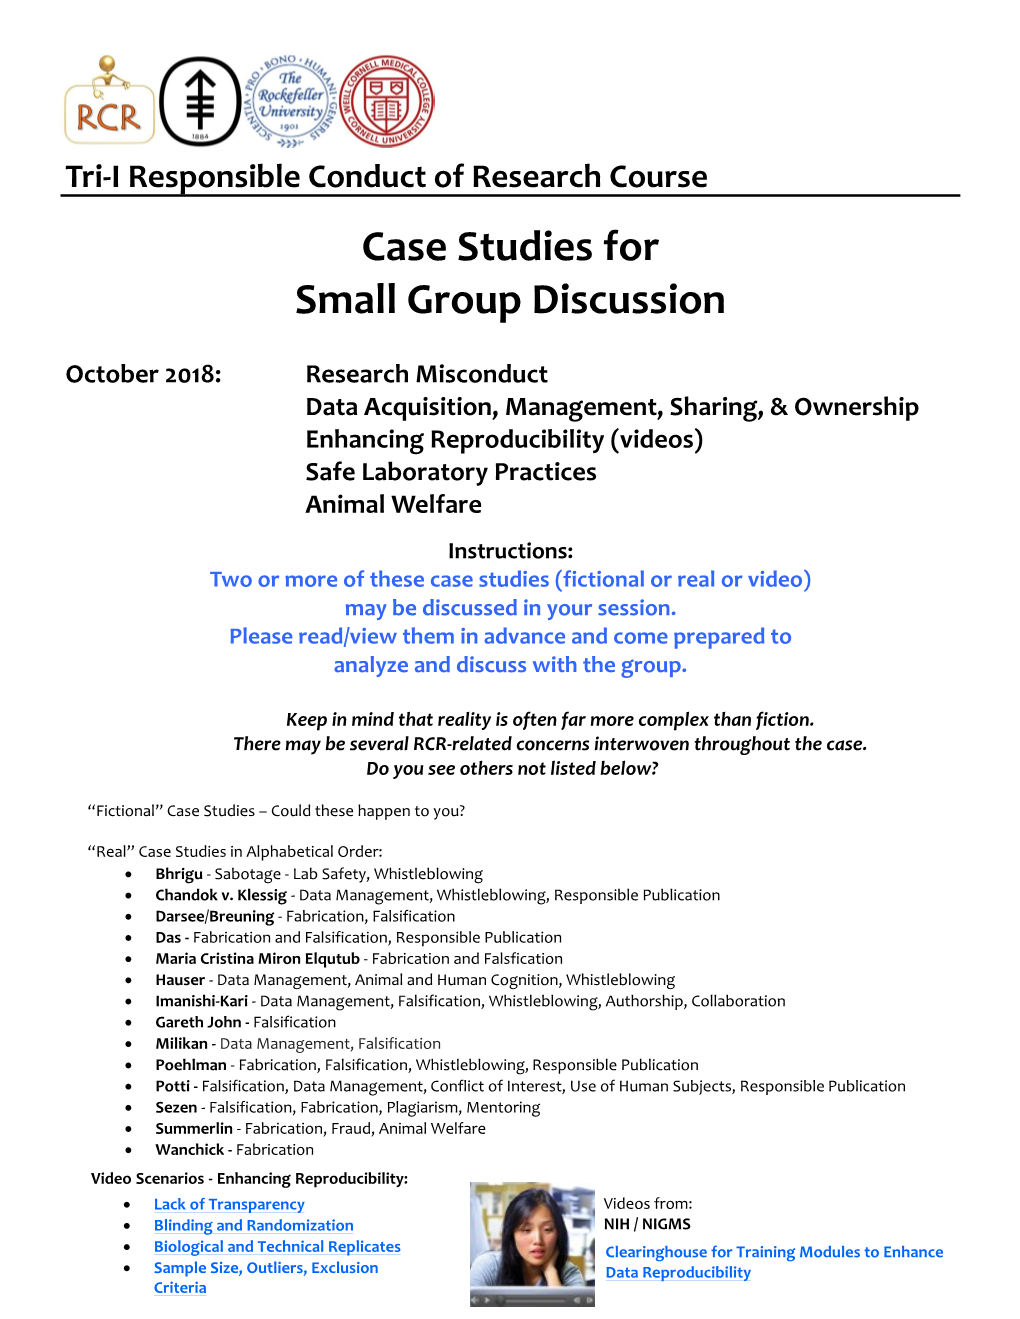 Case Studies for Small Group Discussion